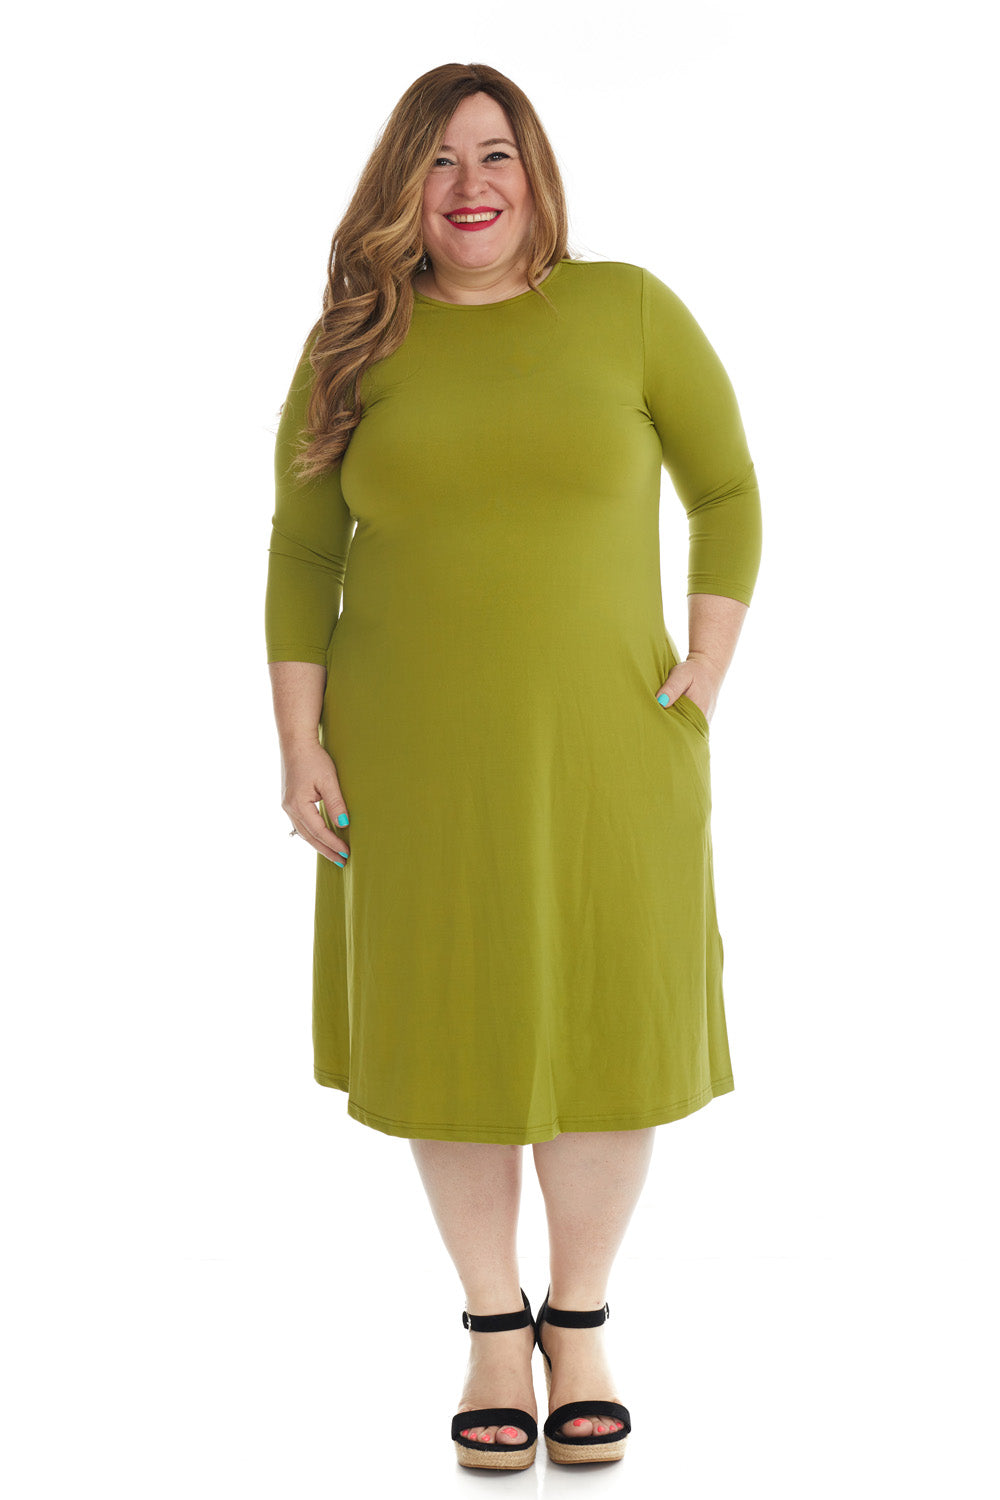 green flary below knee length 3/4 sleeve crew neck modest tznius a-line plus size dress with pockets